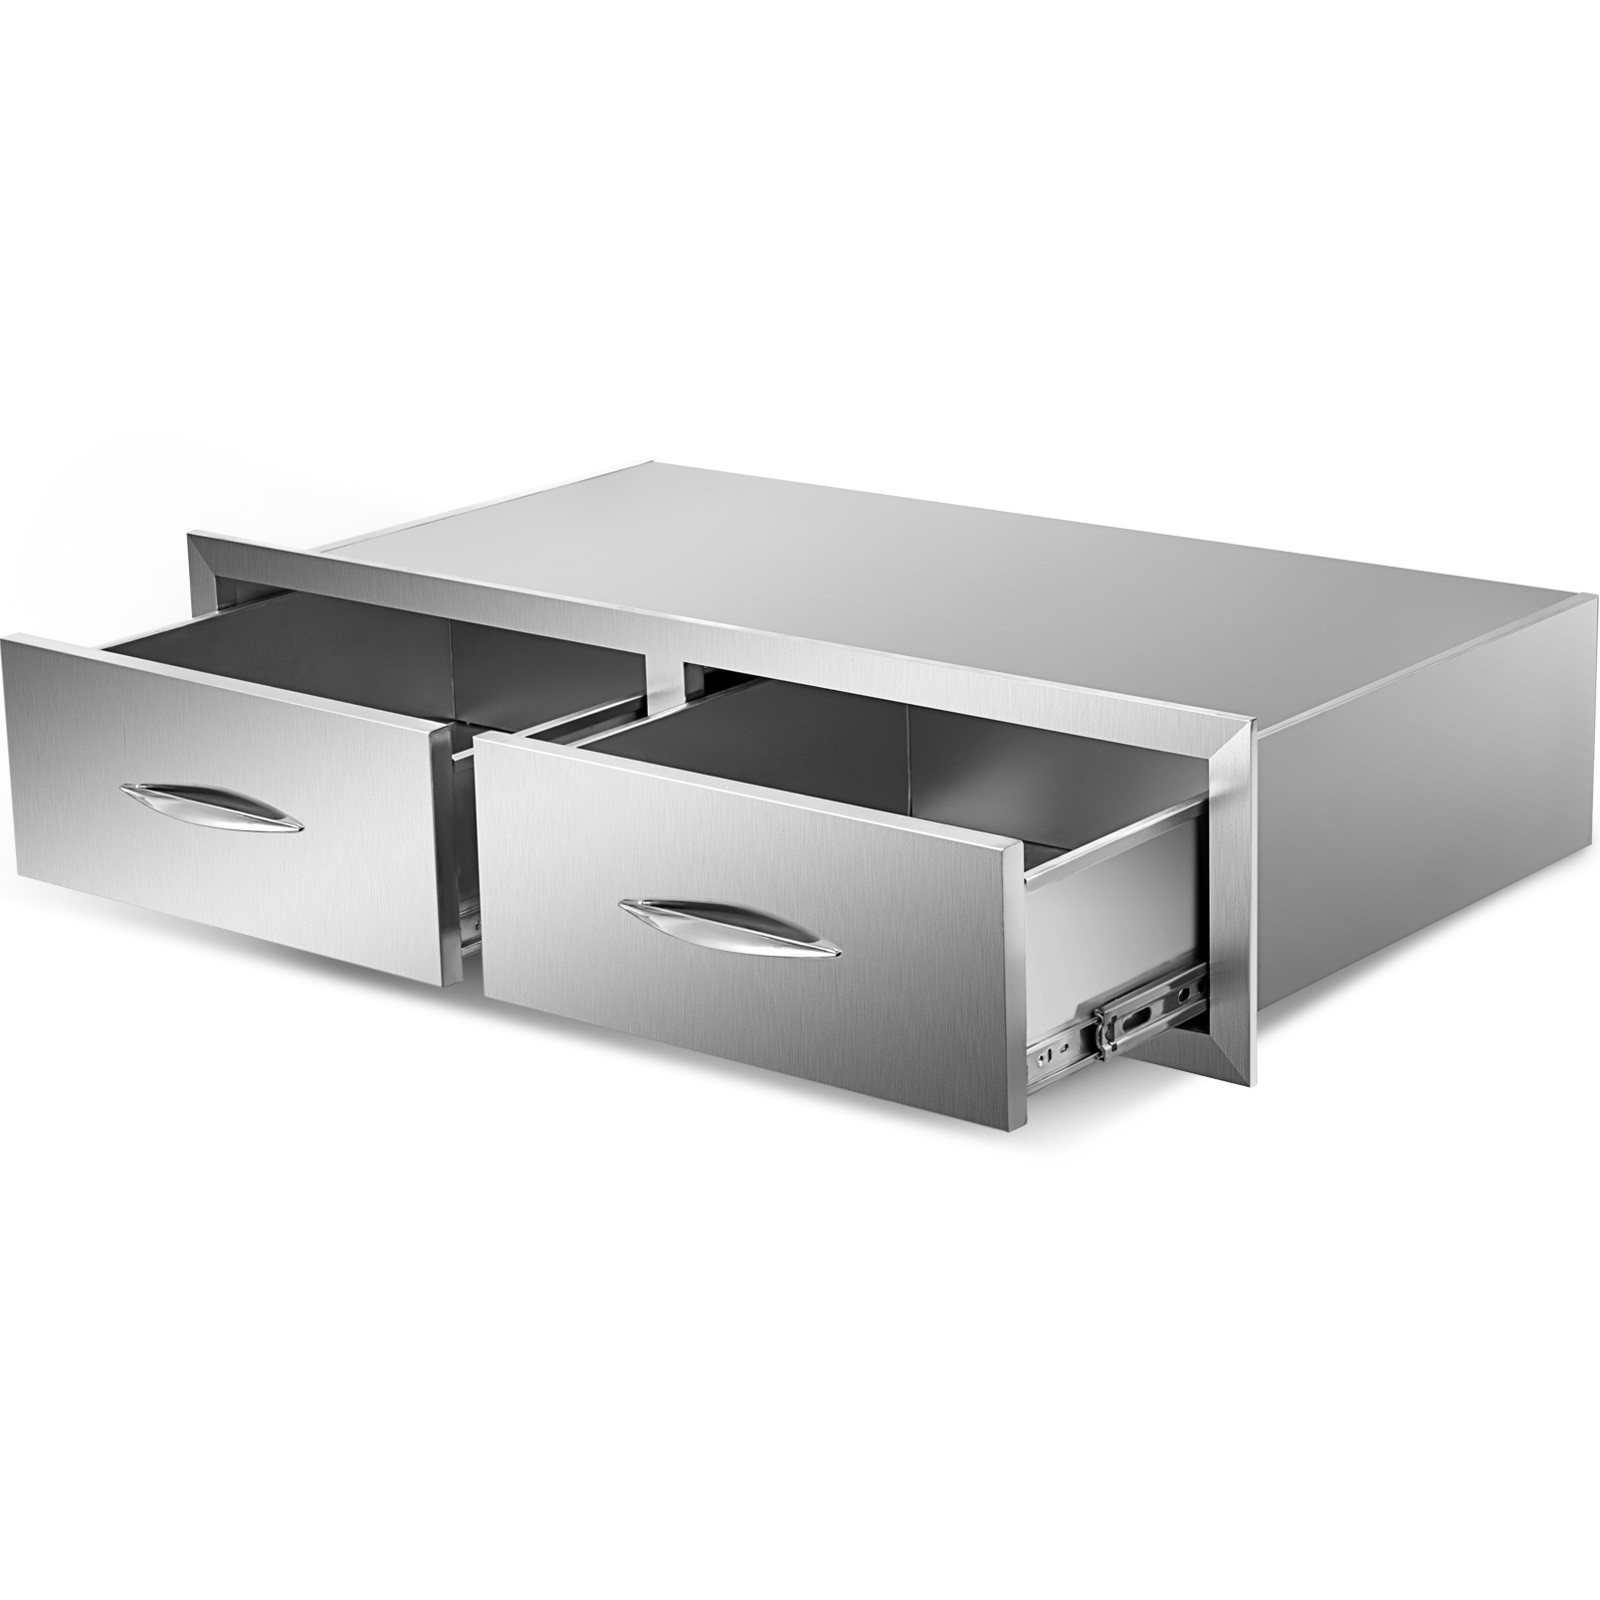 3 Tiers Nurxiovo 27x26x21 Inch Outdoor Kitchen Access BBQ Drawer with Handle Chrome. 